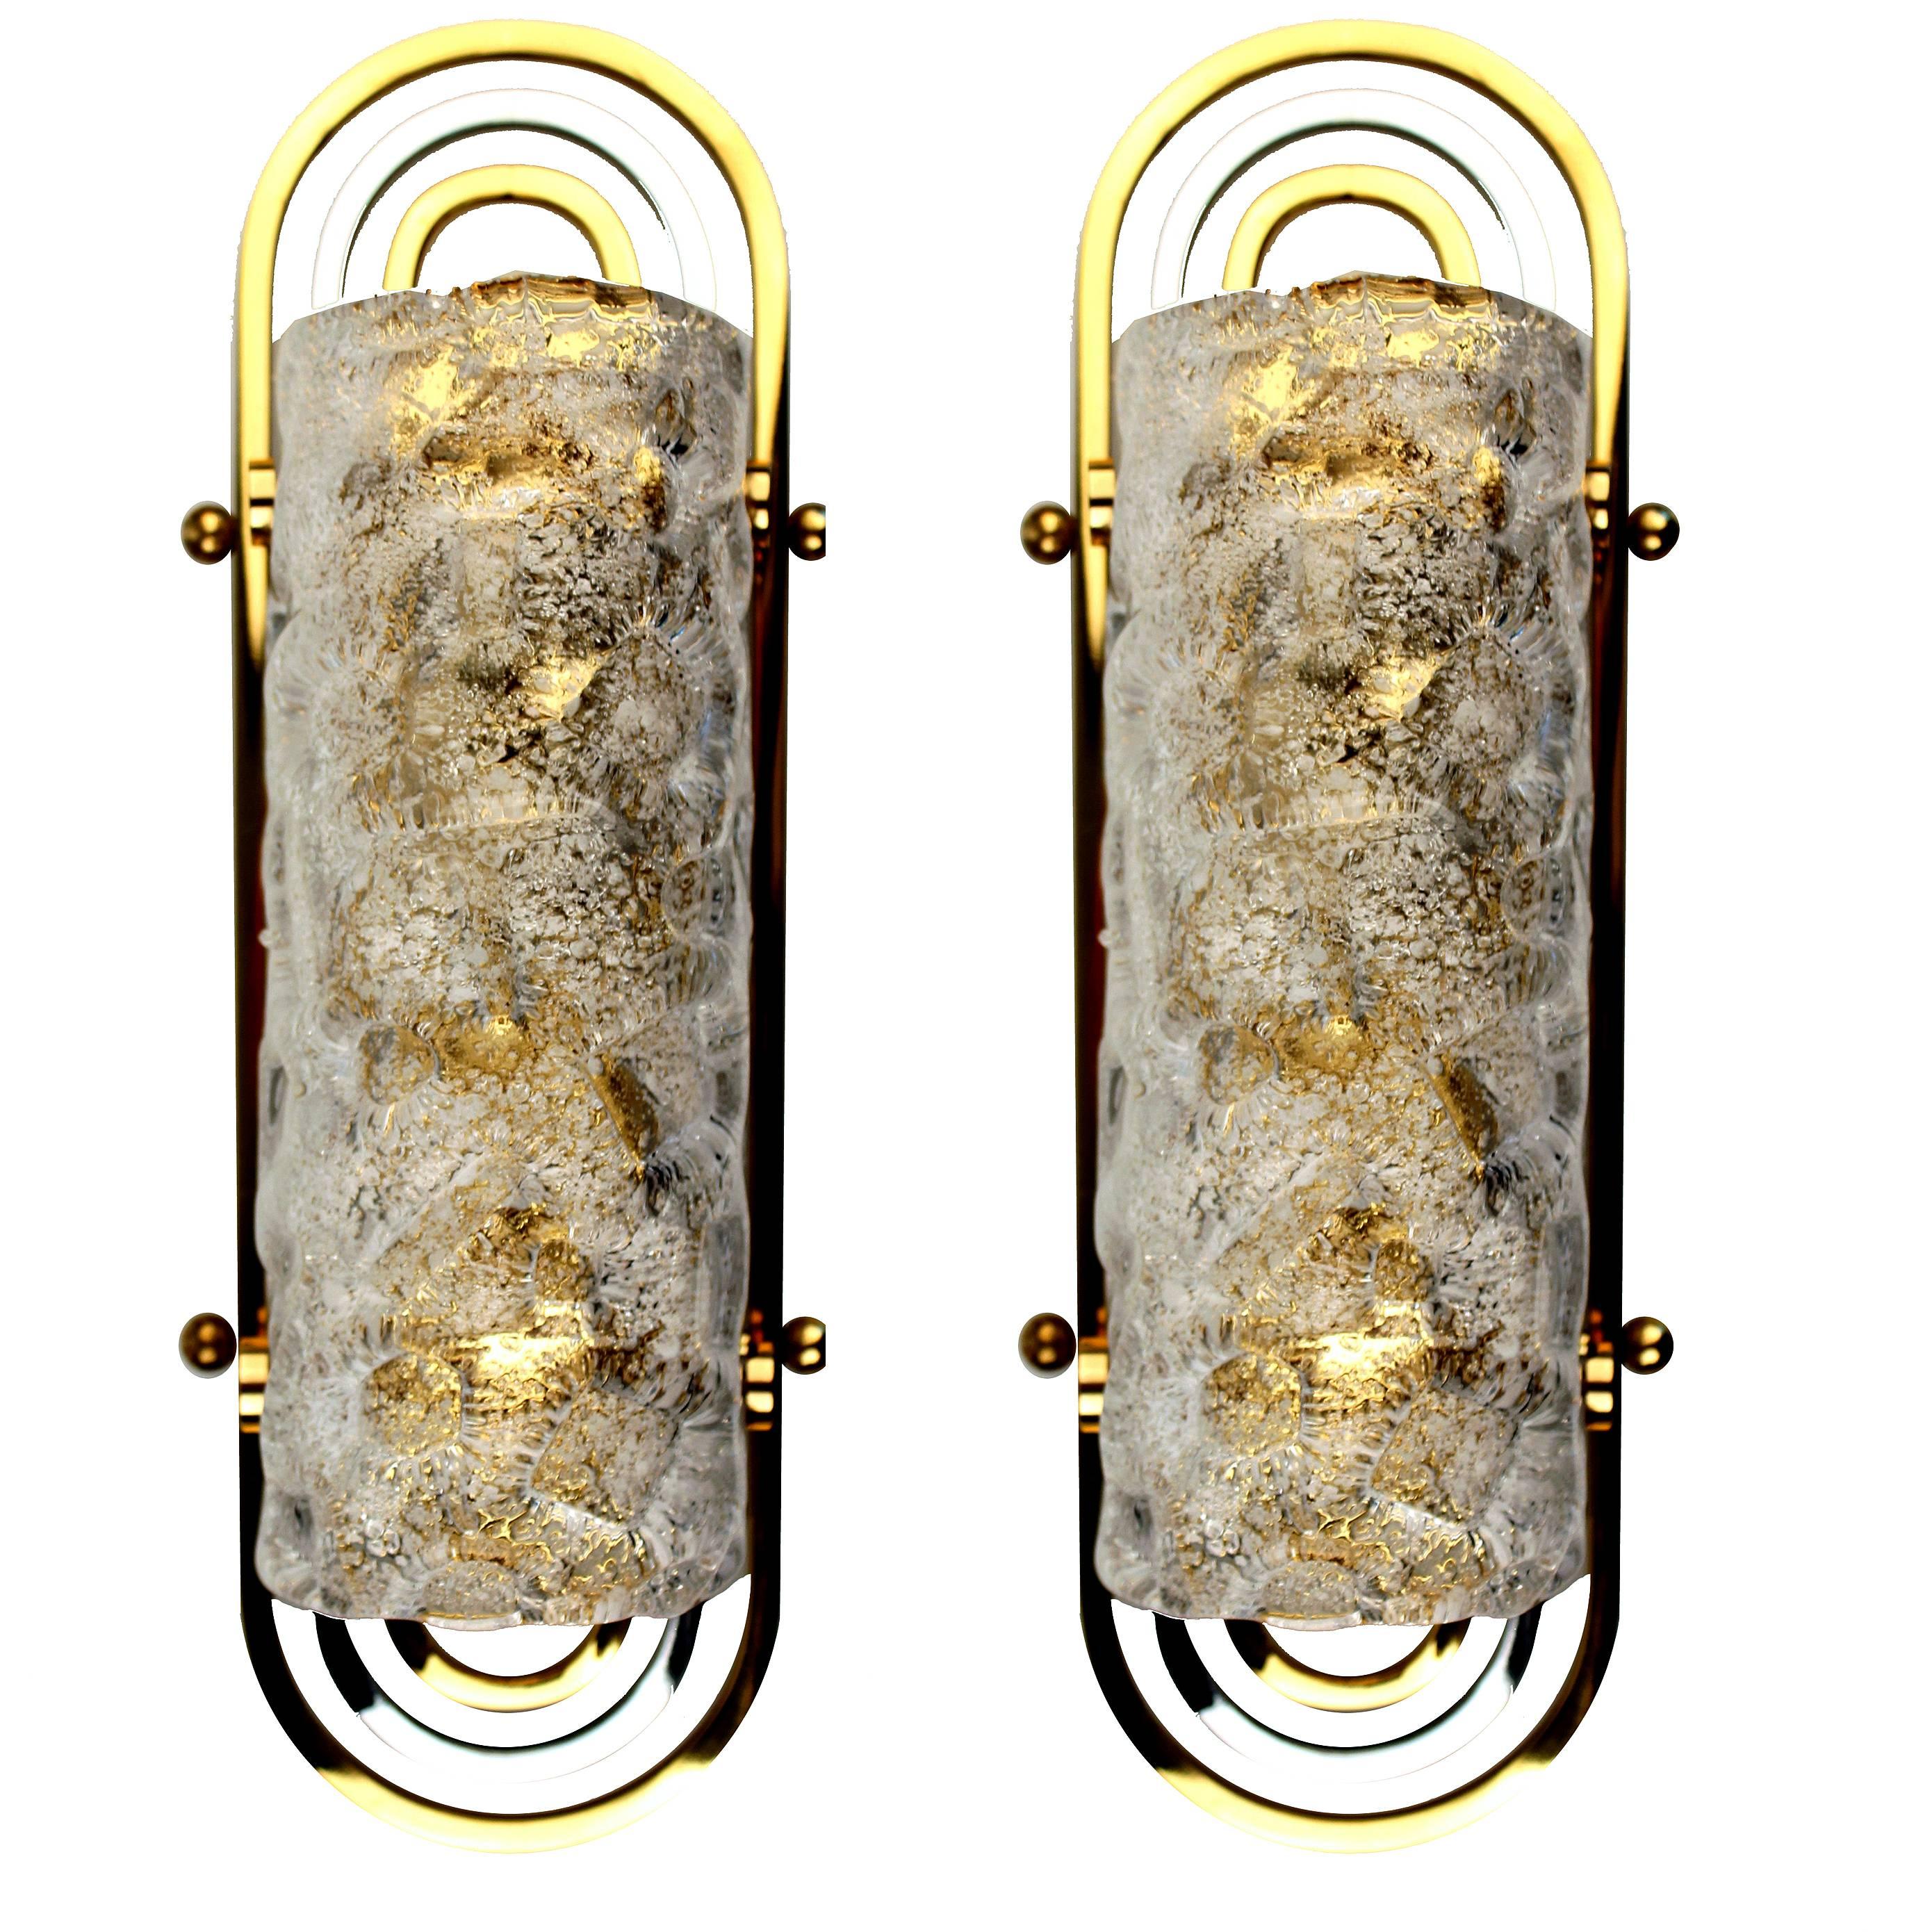 Pair of Schro¨der sconces, half cylindrical murano glass shades set on a triple loop chrome and brass frame.

One candelabra size bulb up to 60 watts each - LED compatible - run on voltage from 110 till 240 volts.

With the 1960s came the